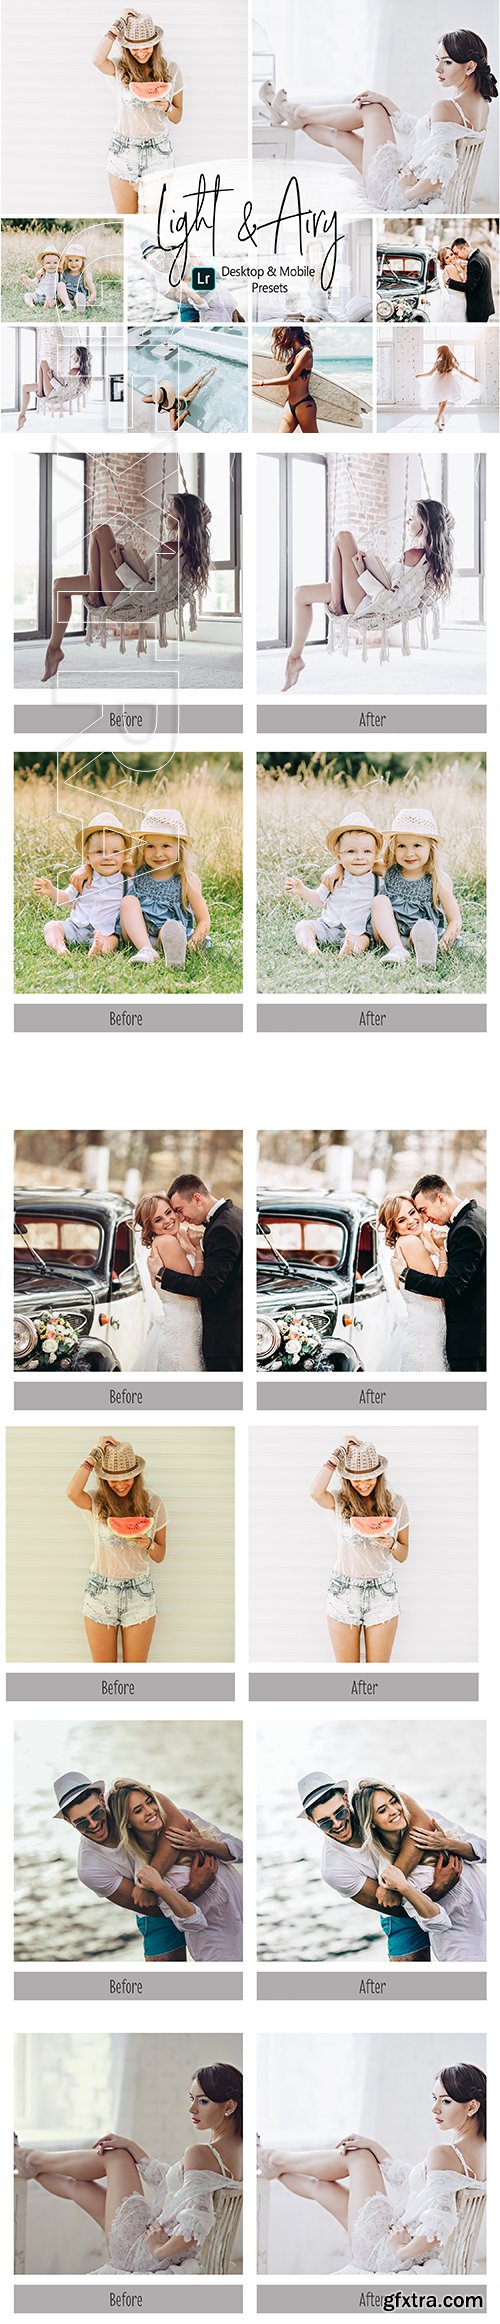 CreativeMarket - Light and Airy Lightroom Presets 3990683